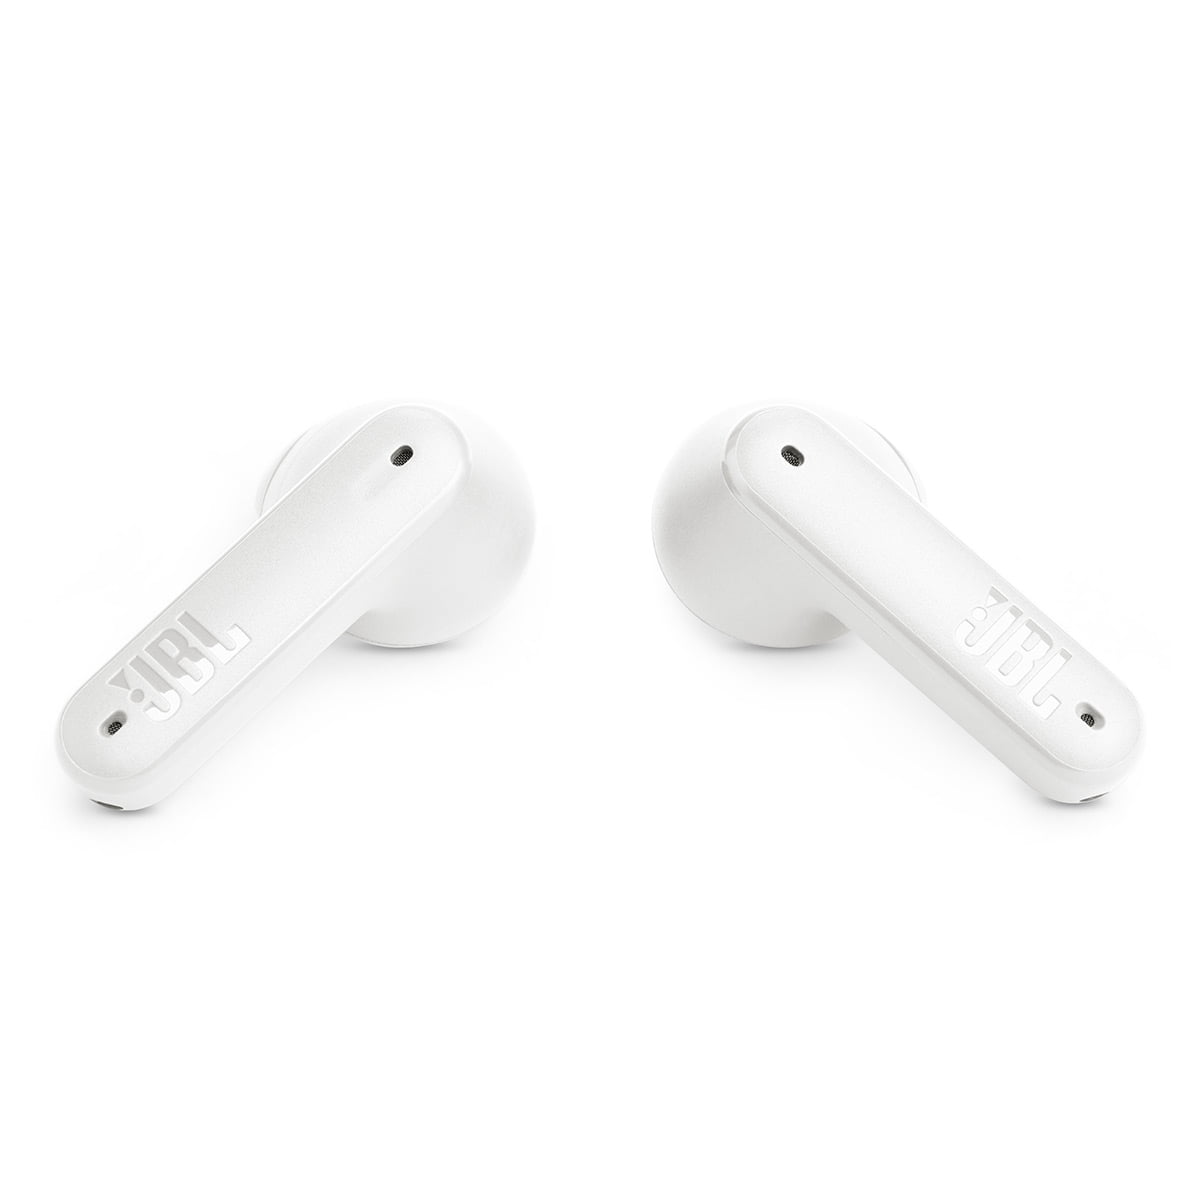  JBL Tune Flex - True Wireless Noise Cancelling Earbuds (White)  and InfinityLab InstantCharger 20W 1 USB Compact USB-C PD Charger (Black) :  Electronics